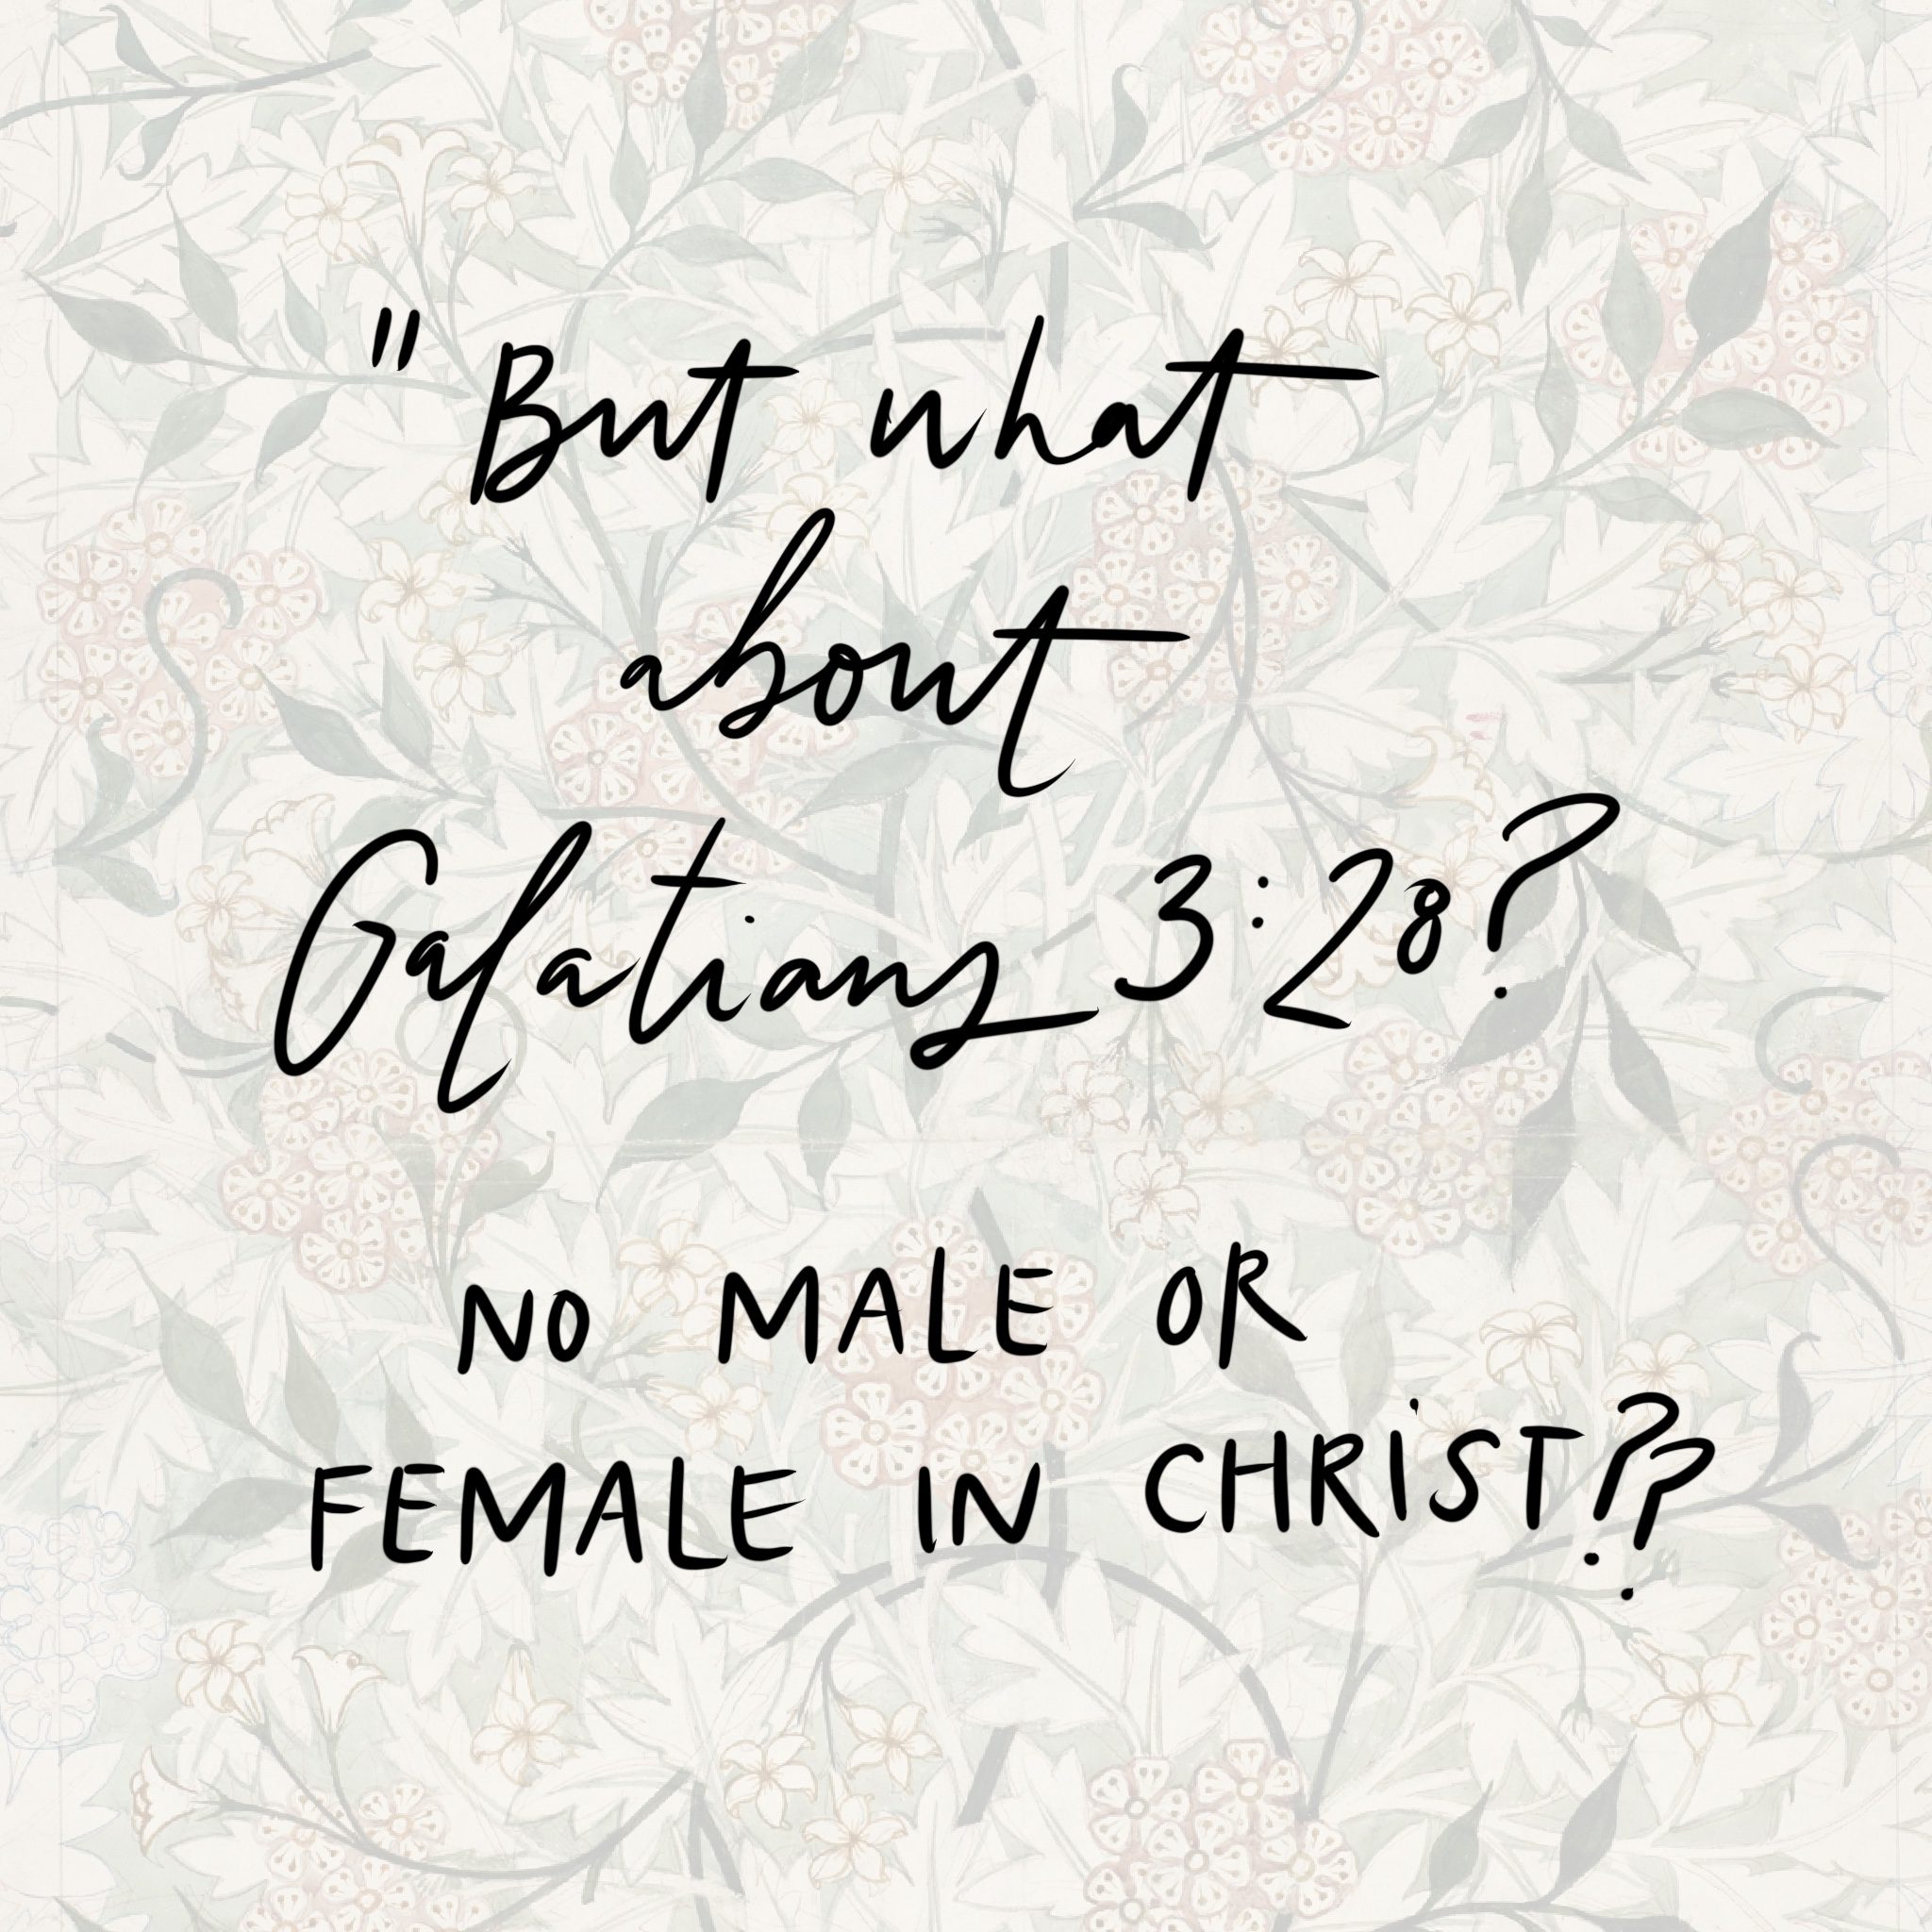 No Male or Female in Christ? -Comments on Submission